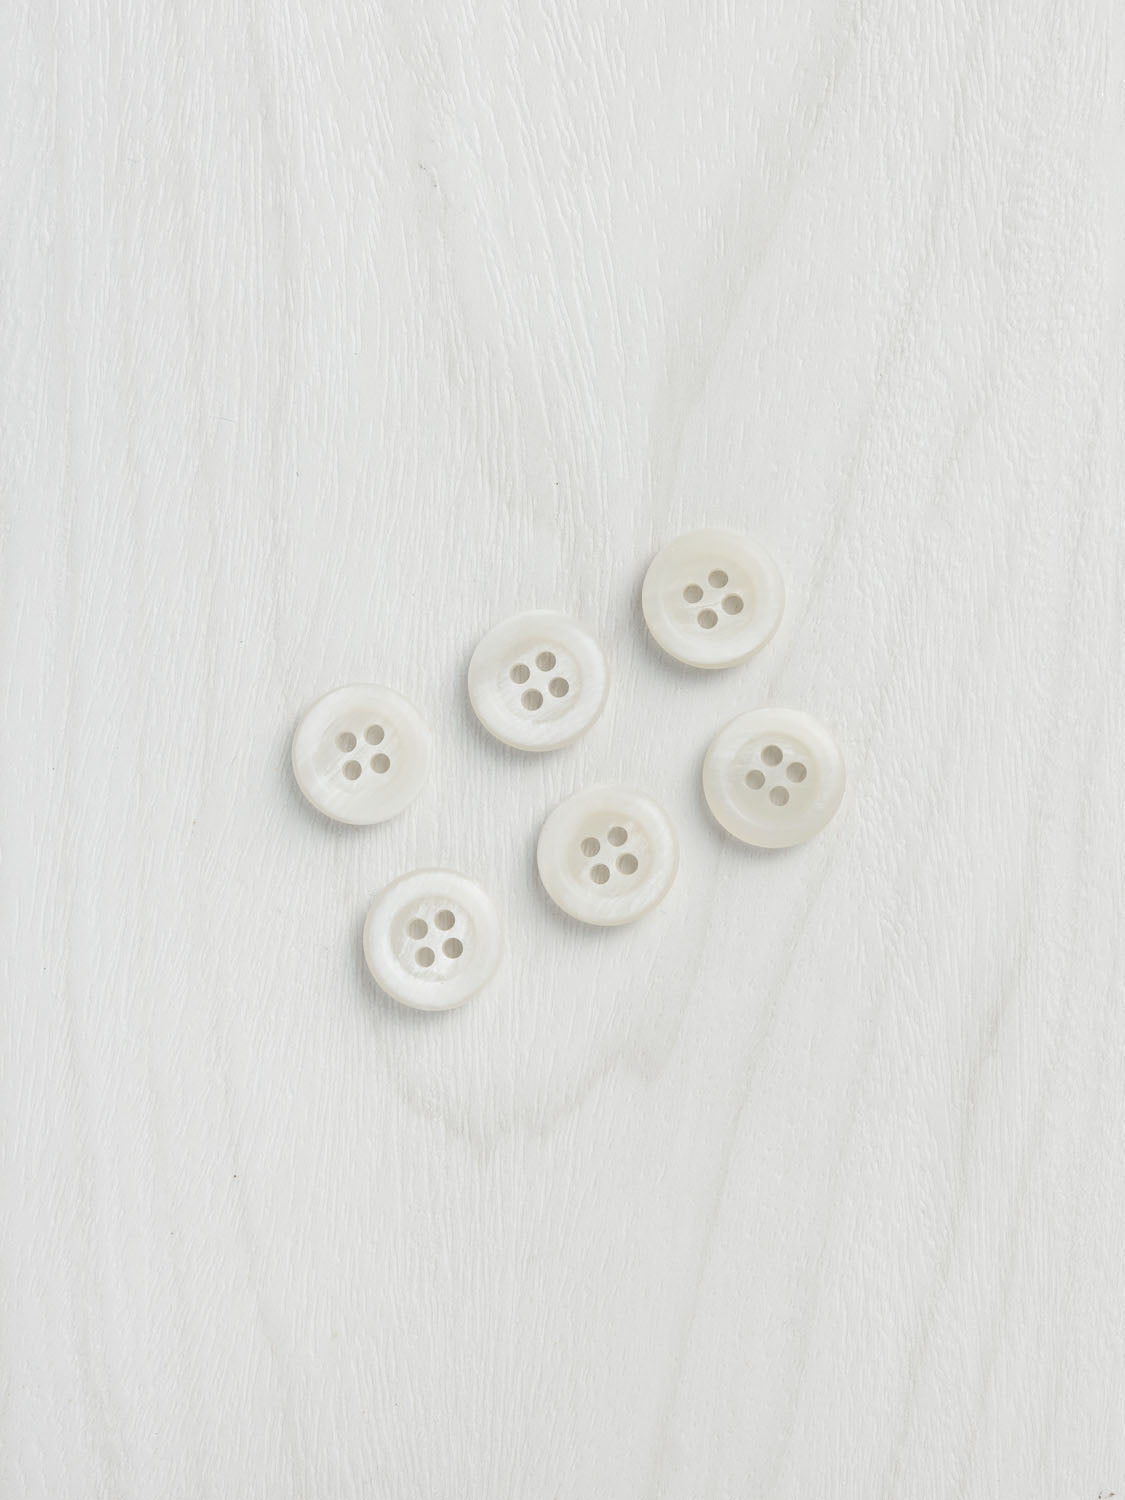 Recycled Paper 16mm (5/8") Buttons - 6 pack